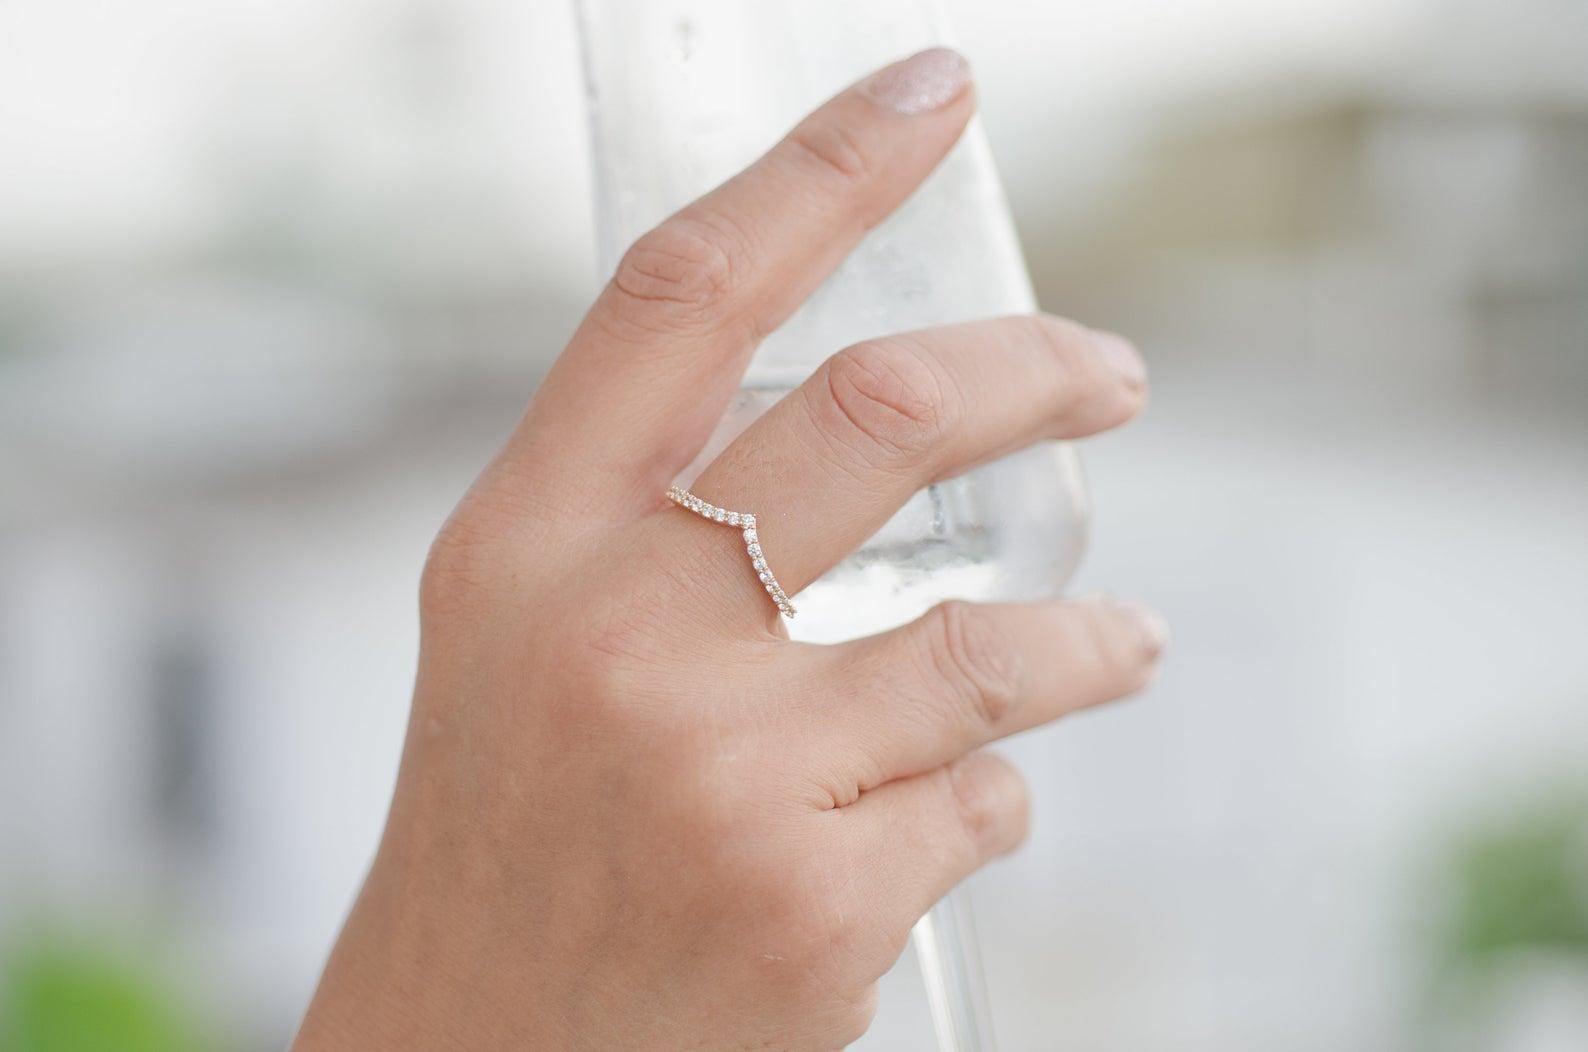 Beautiful chevron ring for Everyday Wear. Slimline of high-quality Diamonds, can wear alone or stack with Wedding Bands or Engagement Ring. Perfect for Anniversary and Holiday Gift.

Band Color/Metal type: 14K Yellow Gold, 14K White Gold, 14K Rose